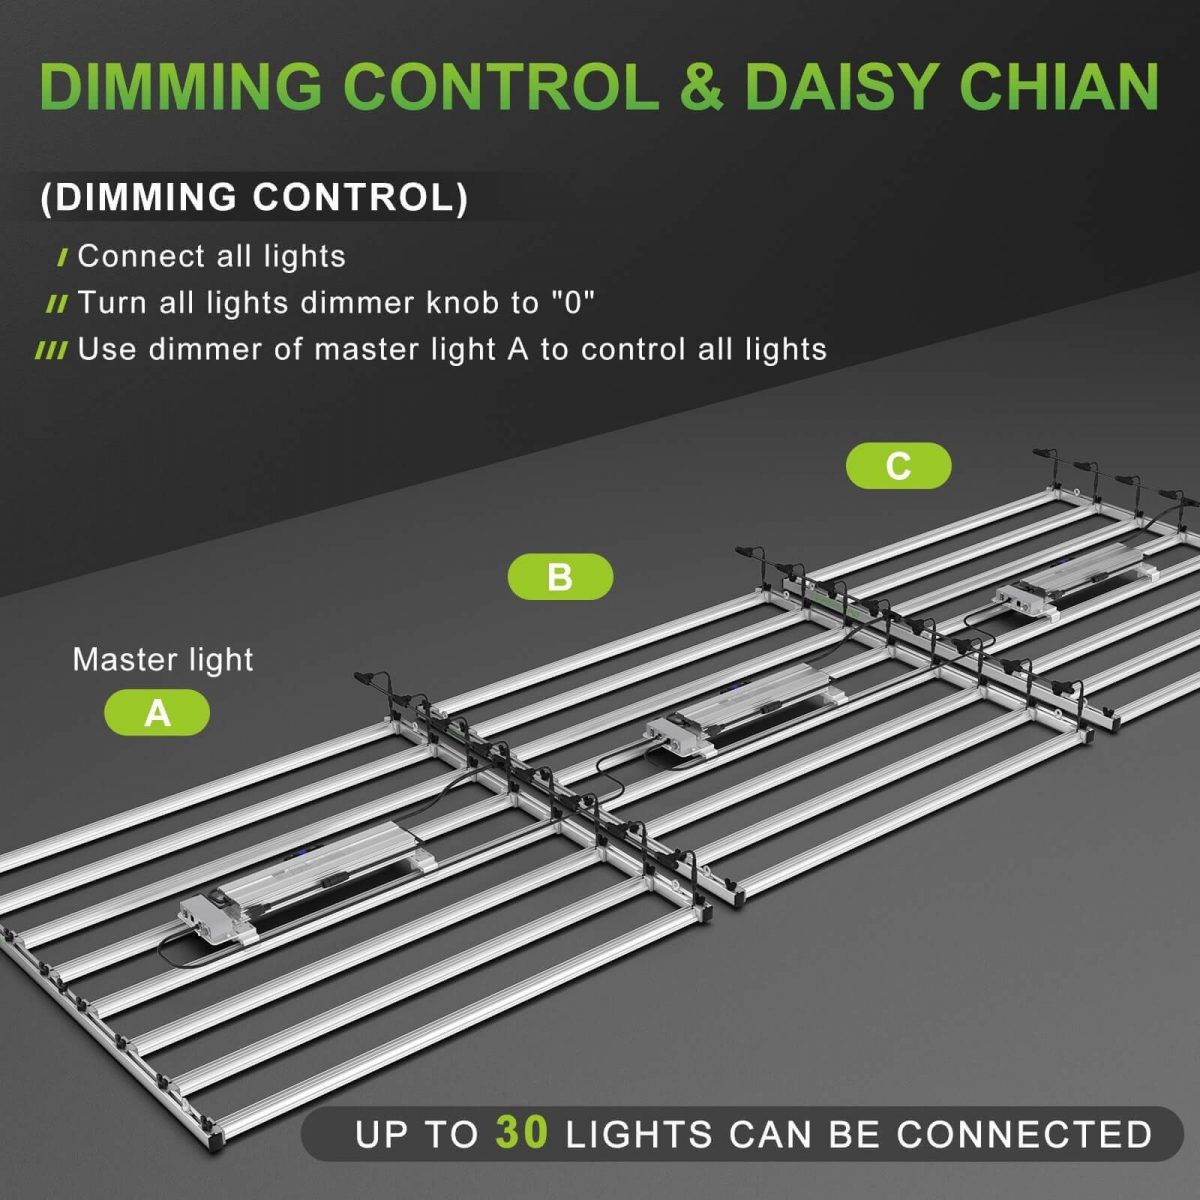 FC-E8000 LED grow lights support dimming daisy chain function to adjust light intensity of up to 30 LEDs with one dimmer.